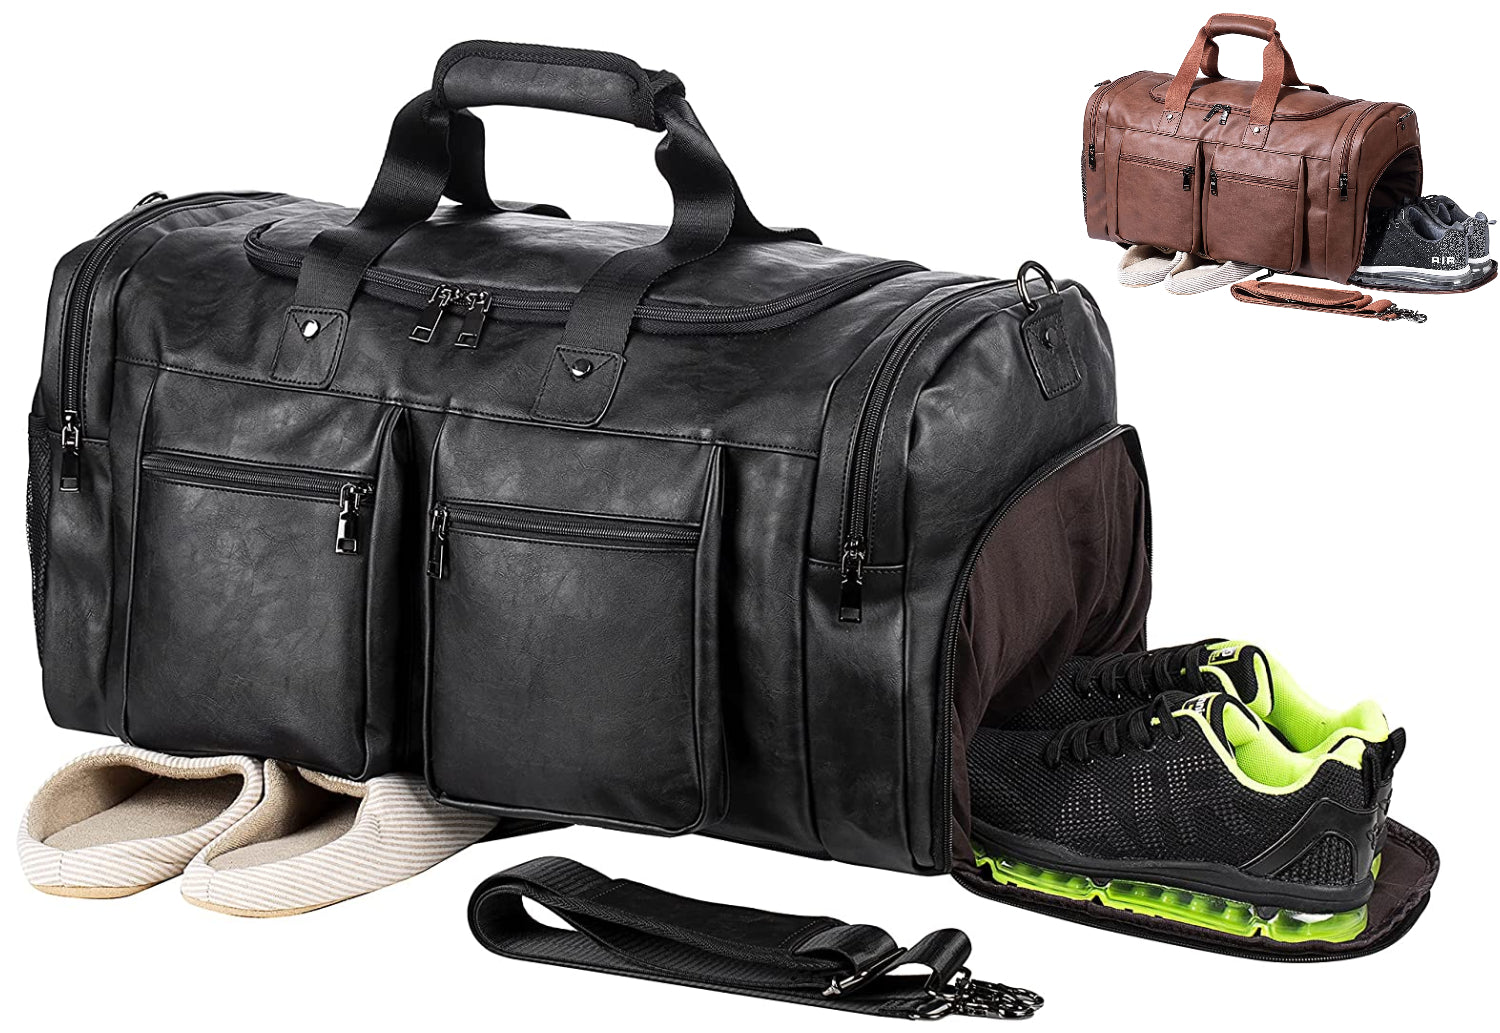 Duffle Bags with Multiple Compartments | Lands' End